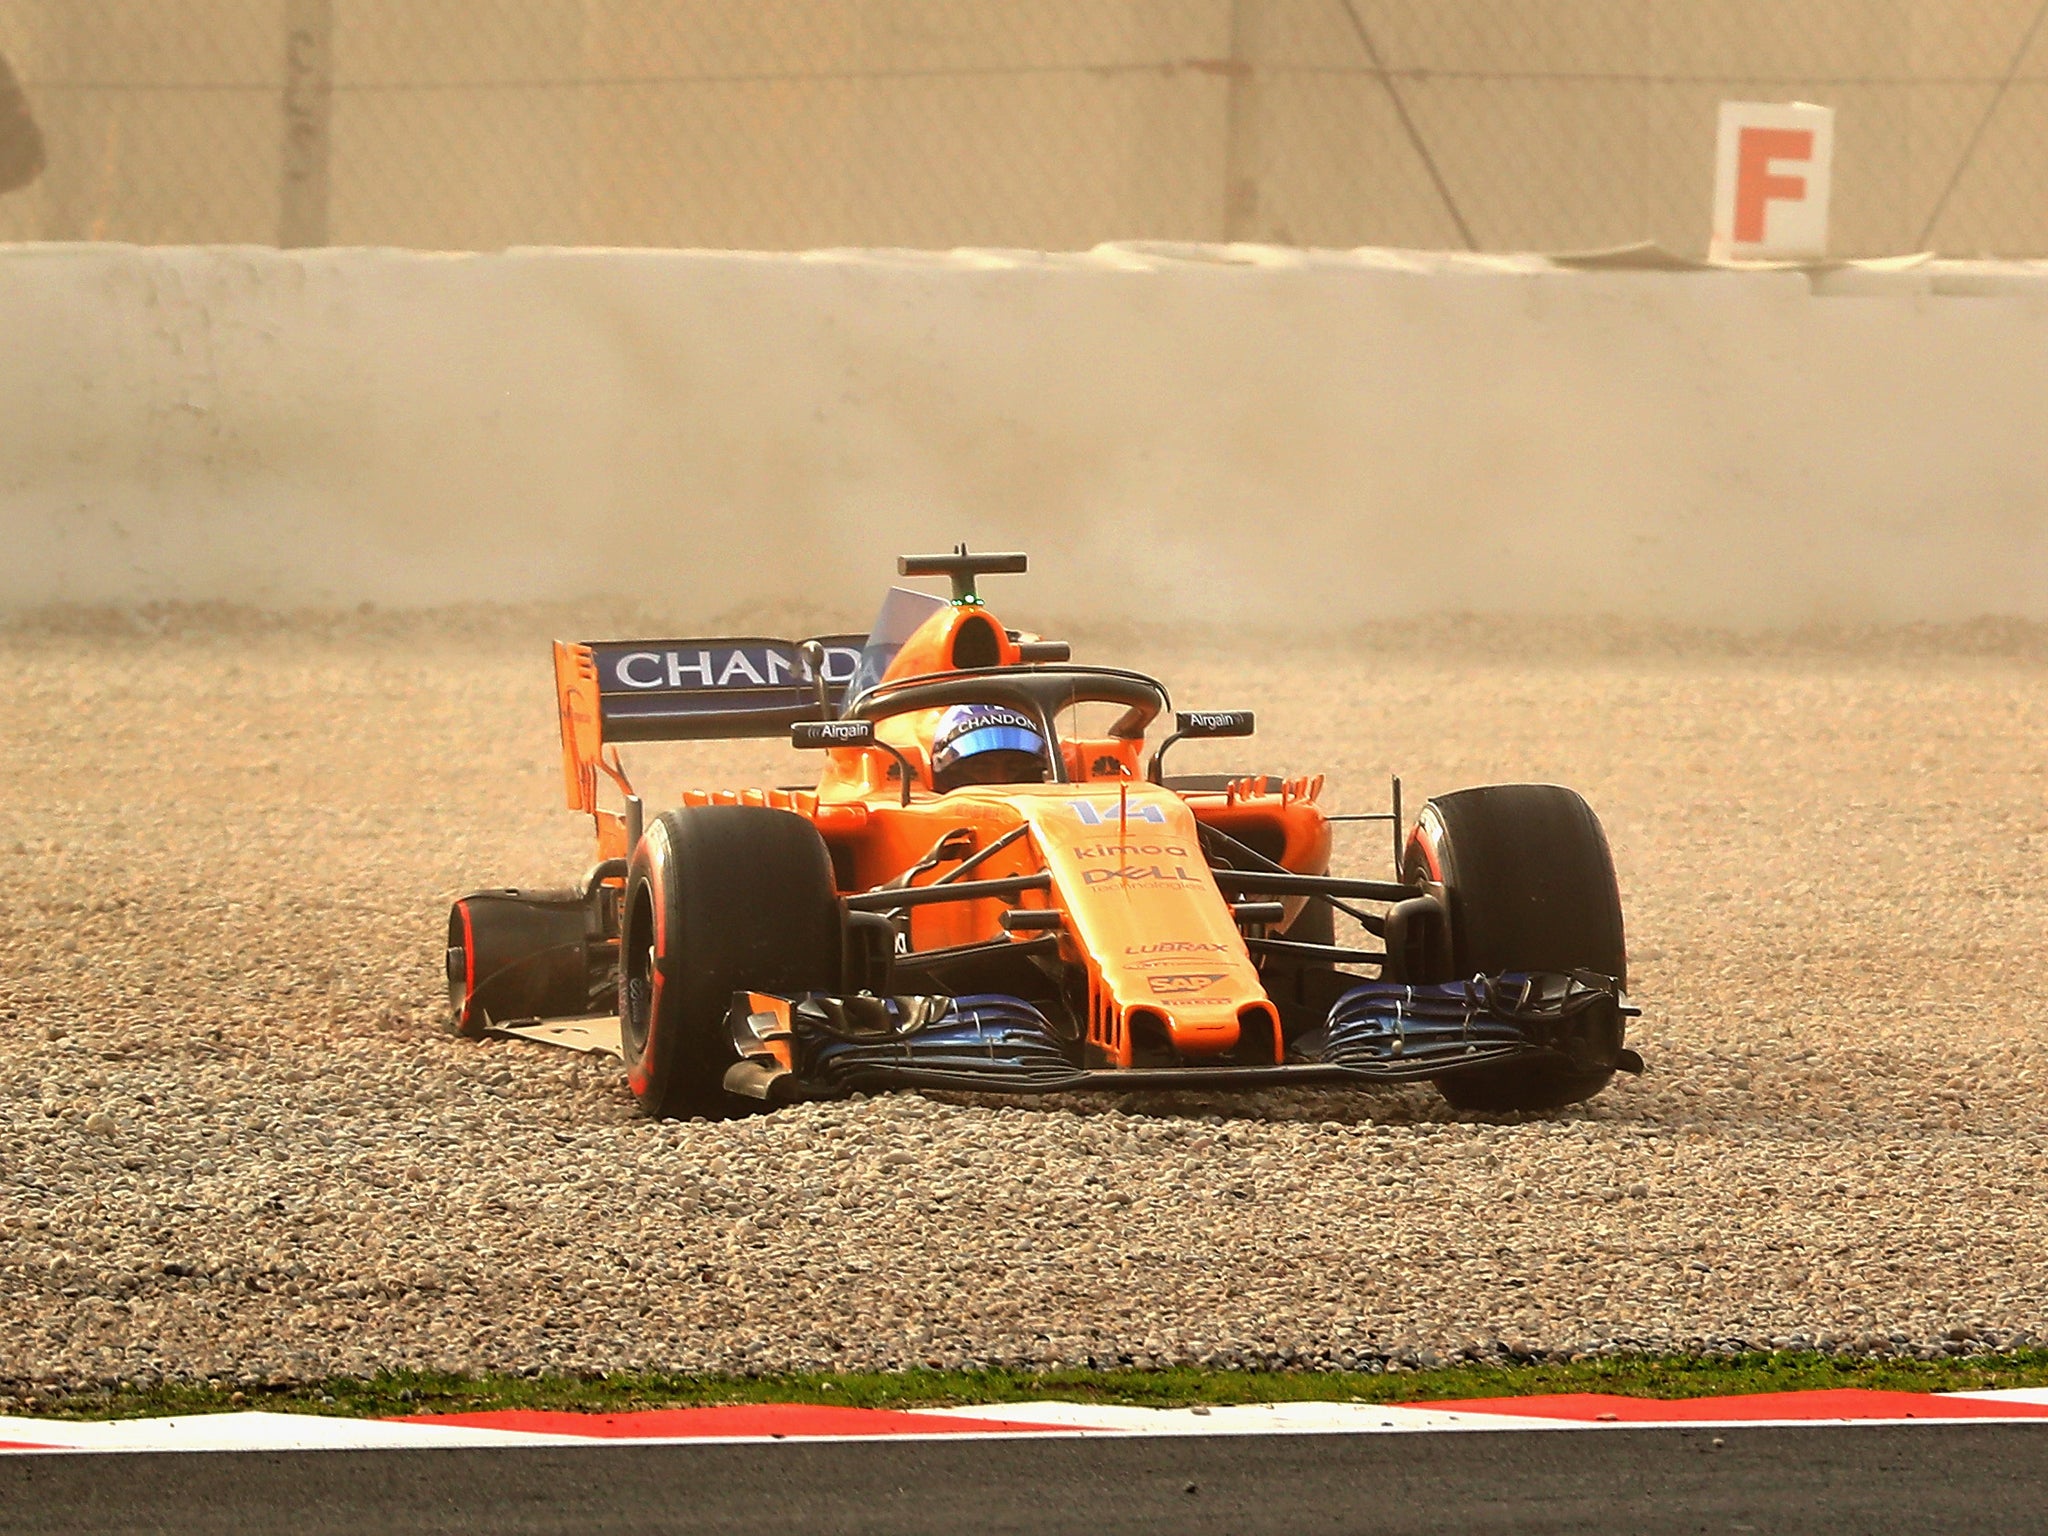 Fernando Alonso spun off the Barcelona track on only his sixth lap at the first pre-season test